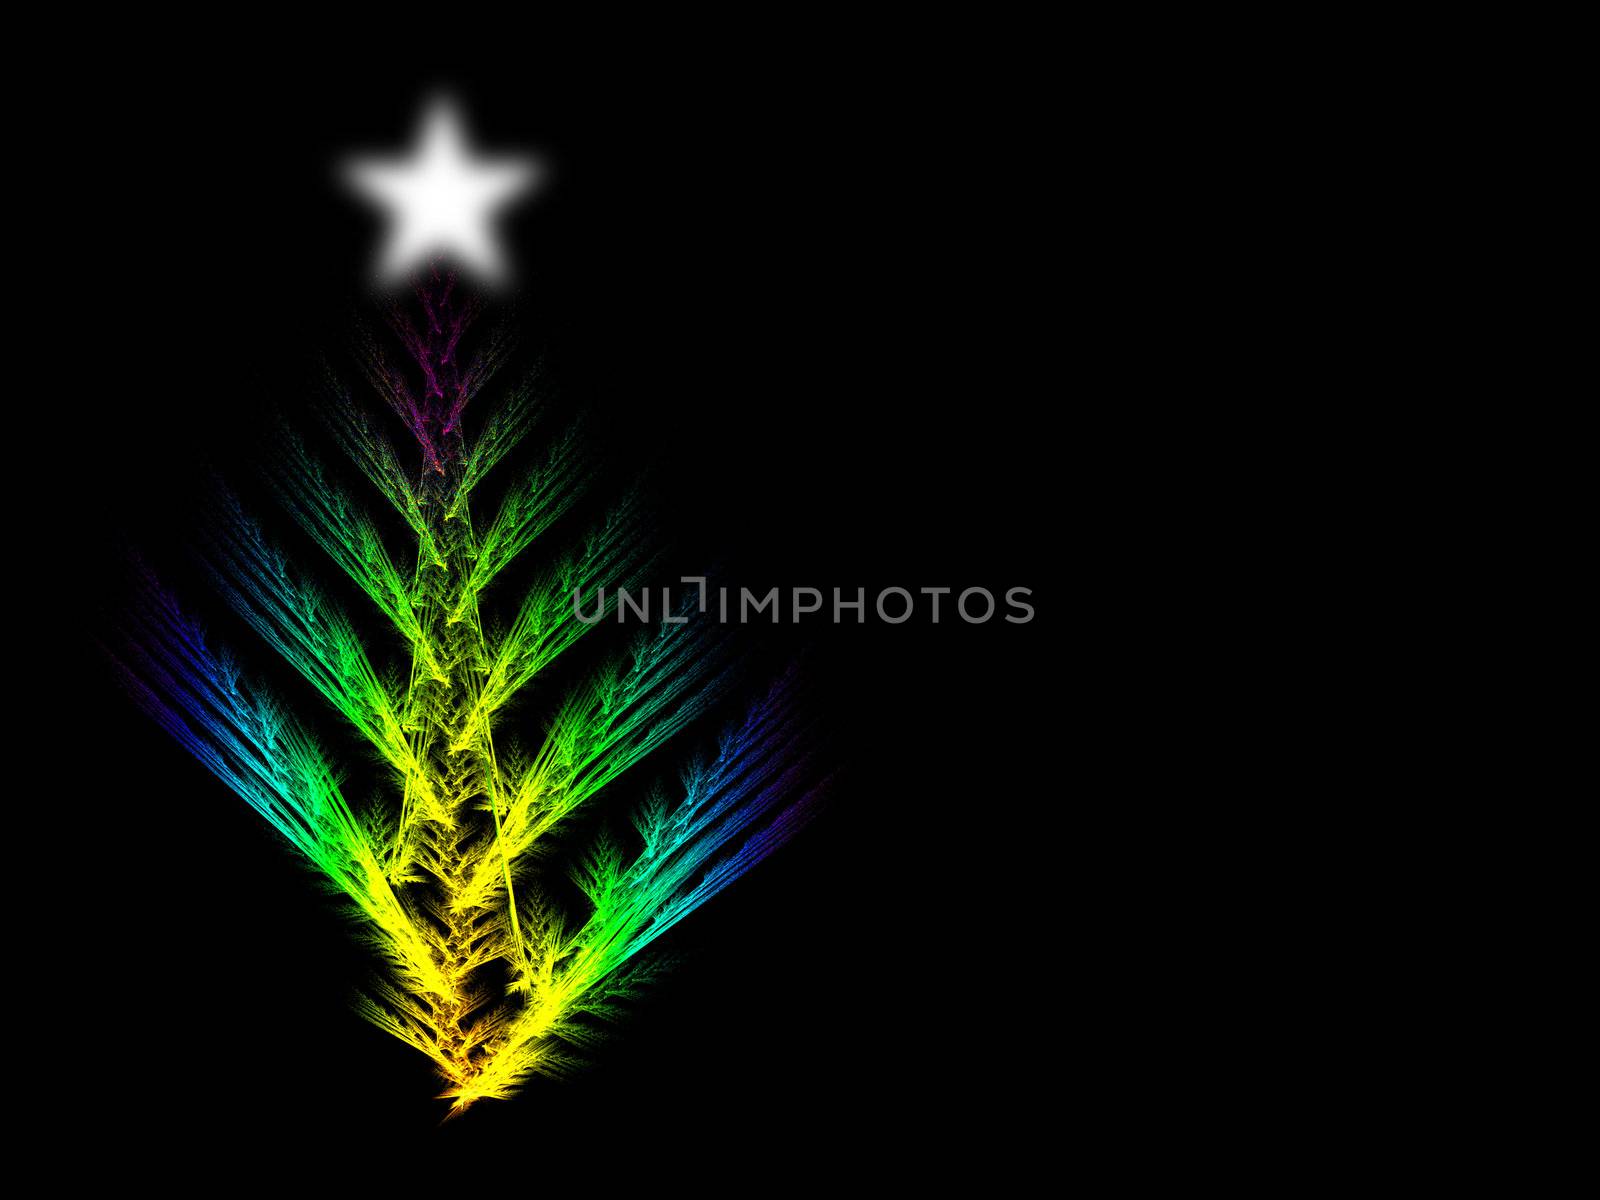 Unusual Christmas tree and star by tommroch